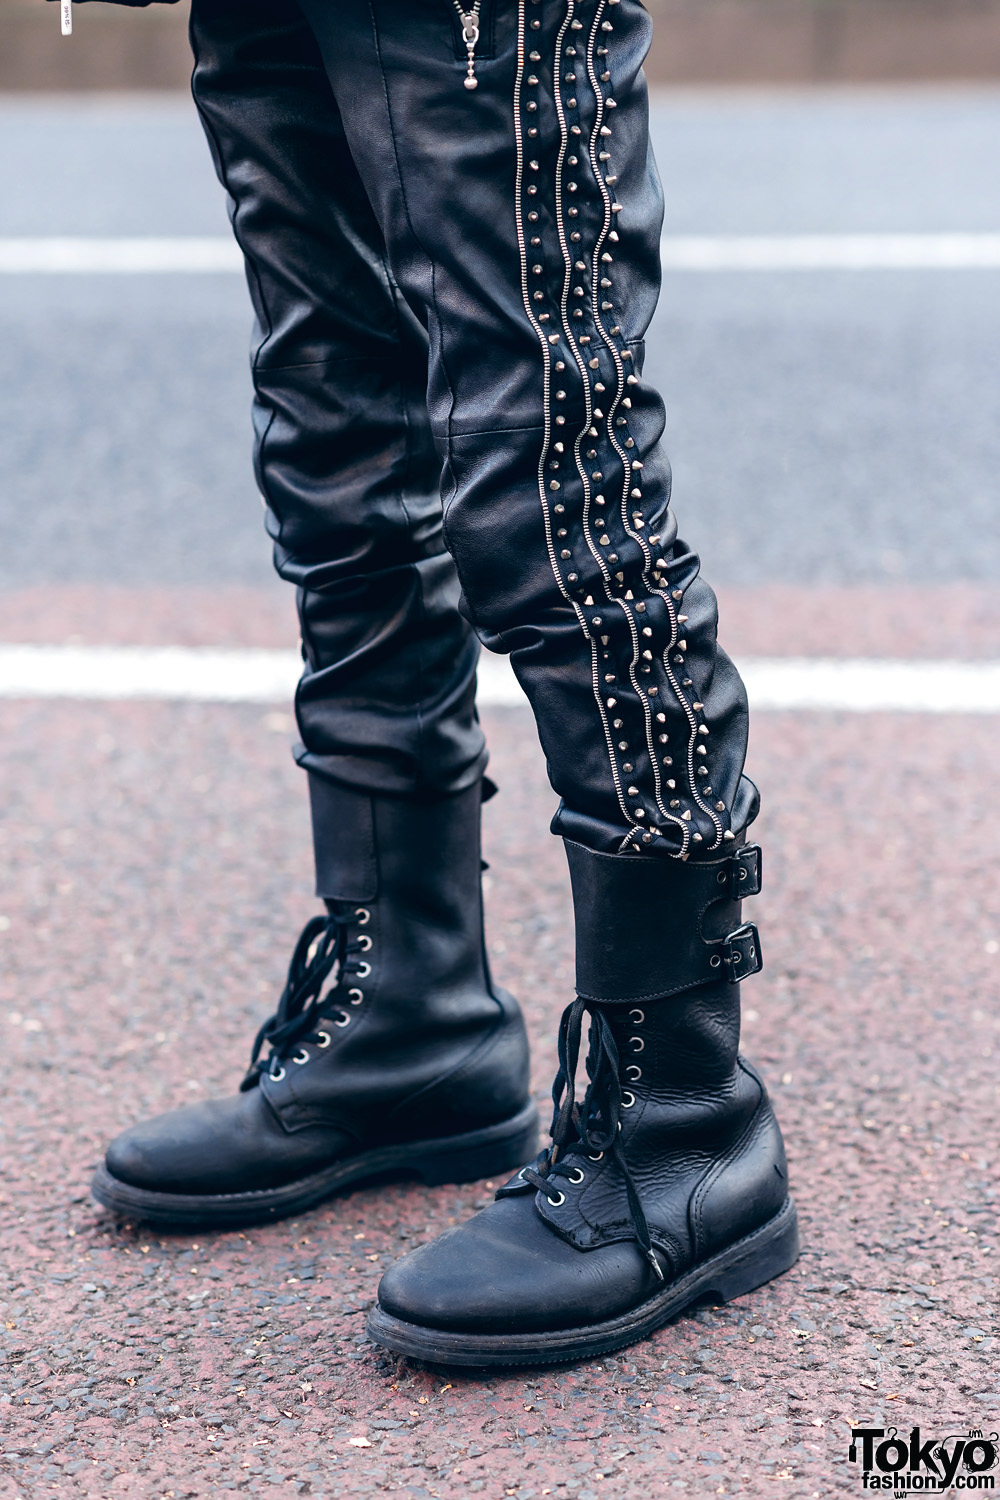 All Black 99%IS- Street Style w/ Blond Hair, Studded Leather Jacket ...